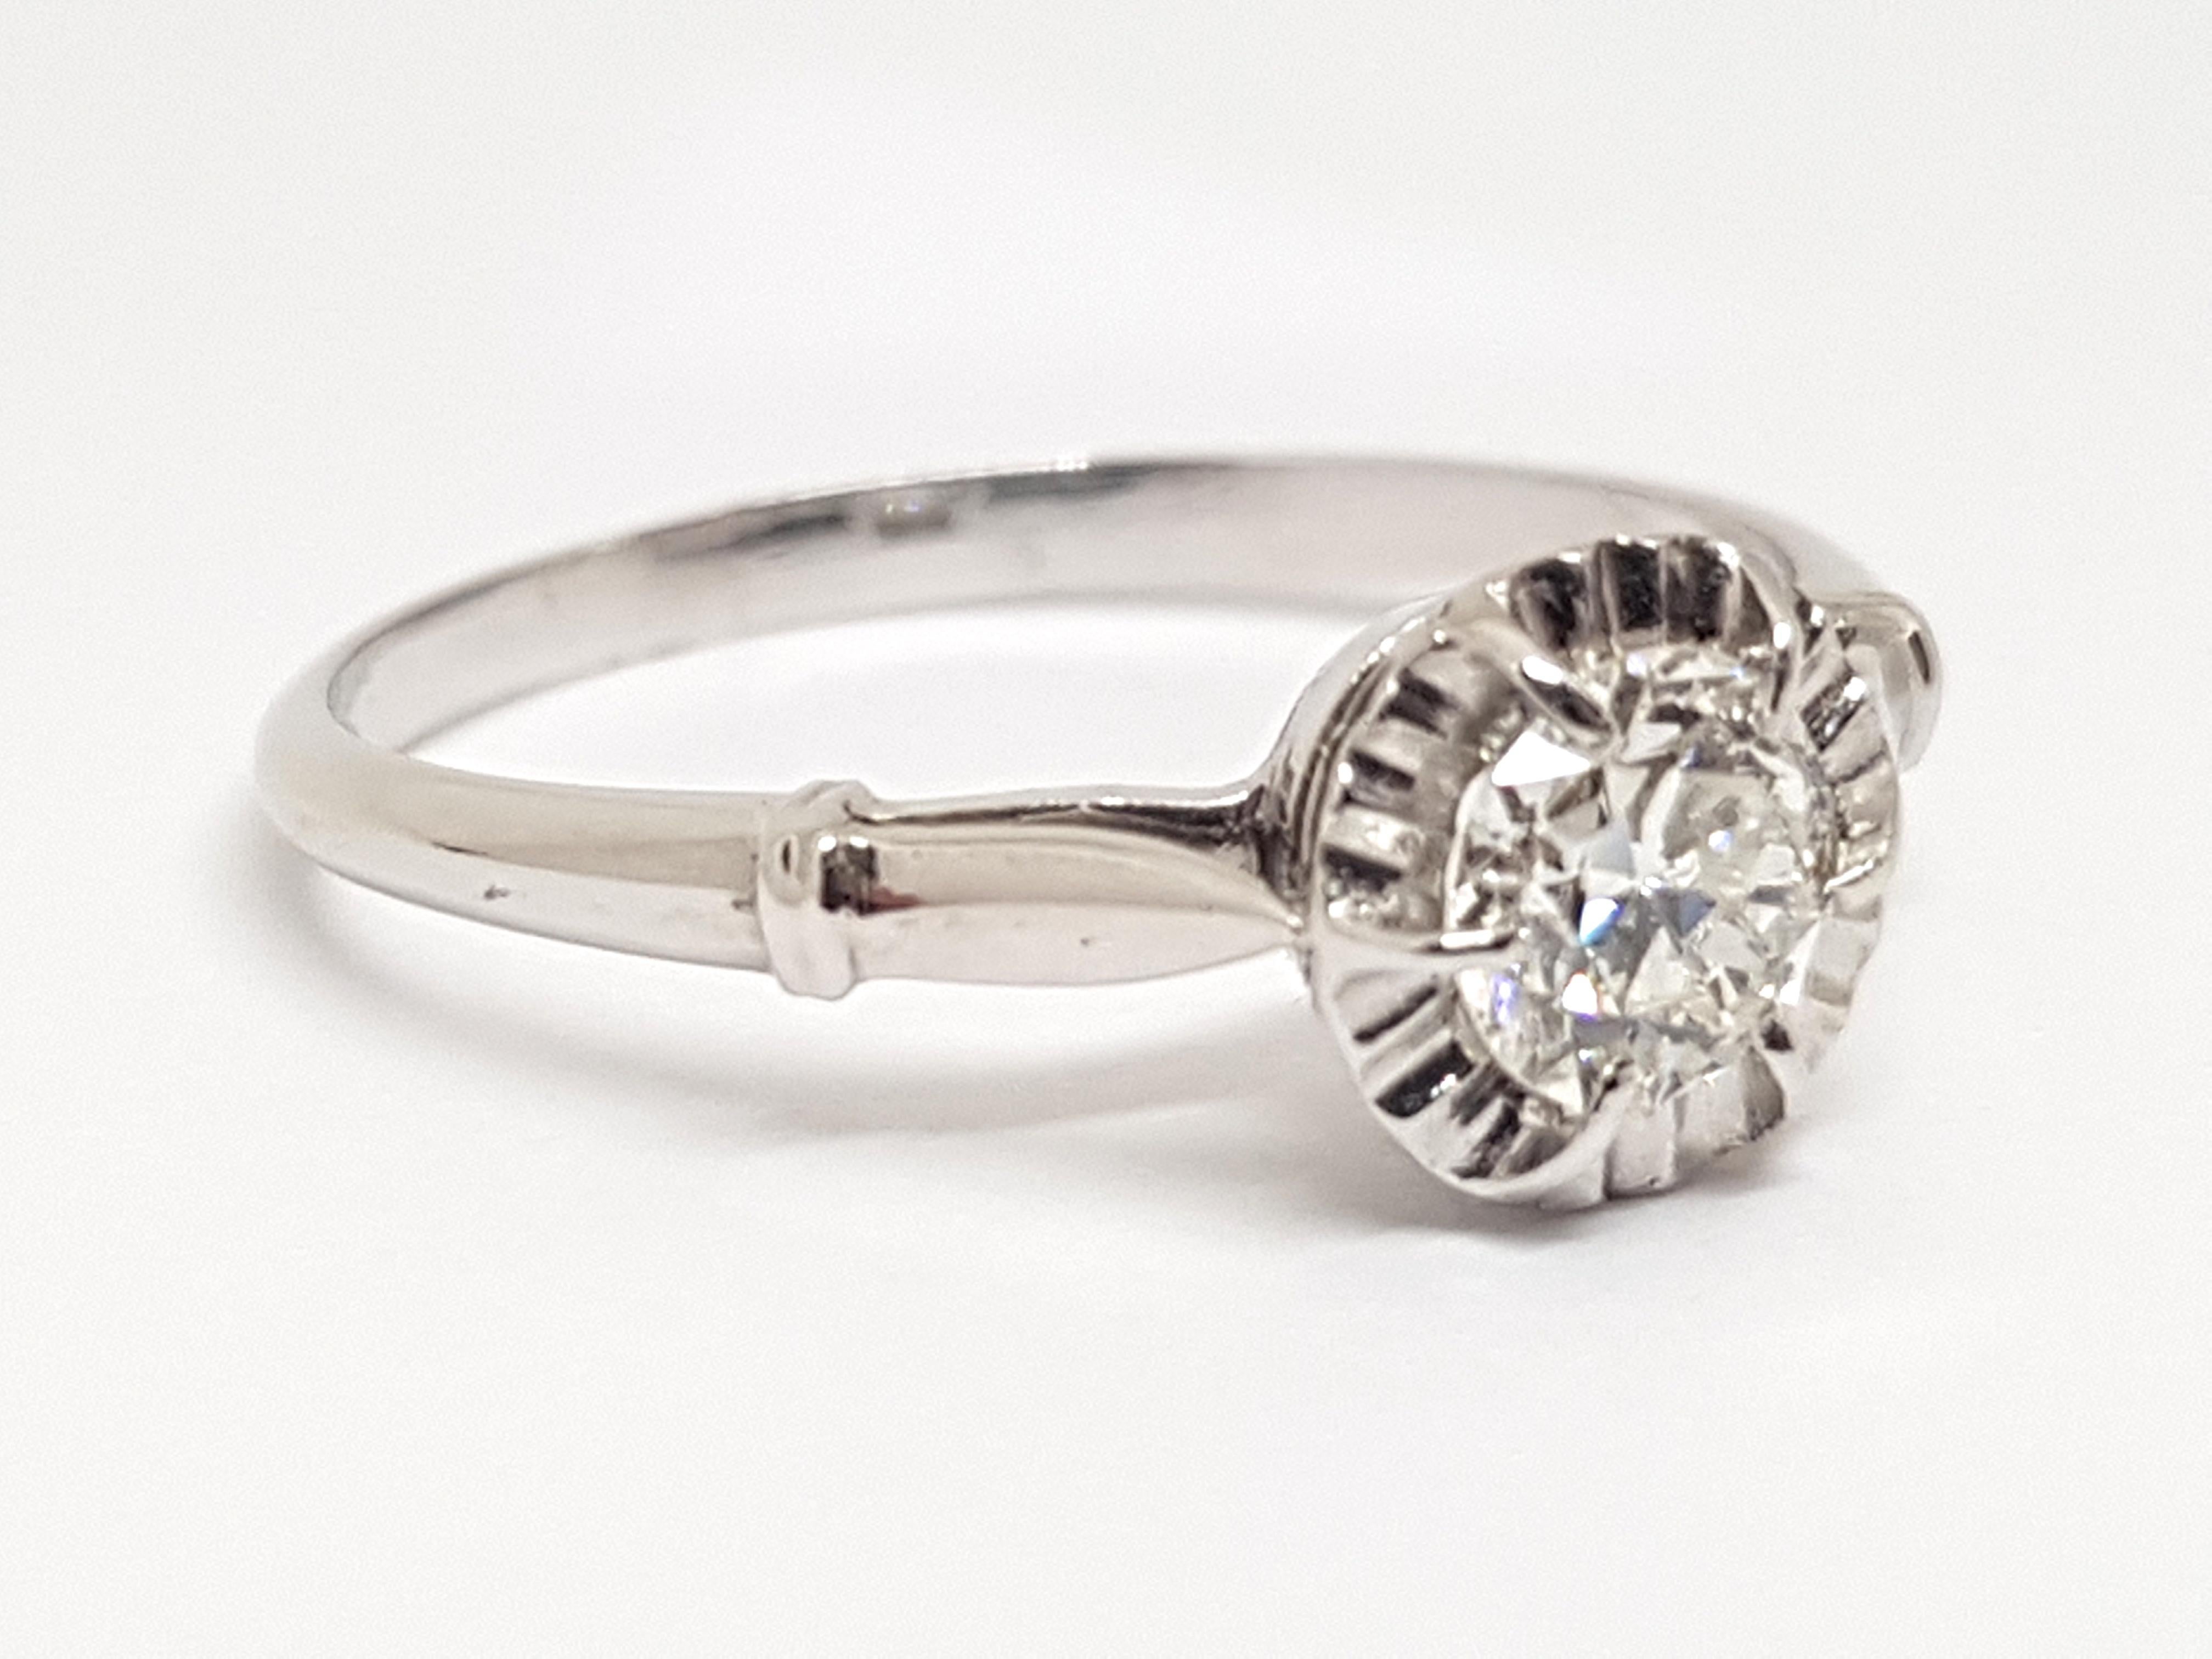 0.43 Carat Antique White Gold Diamond Engagement Ring In Excellent Condition For Sale In Antwerp, BE